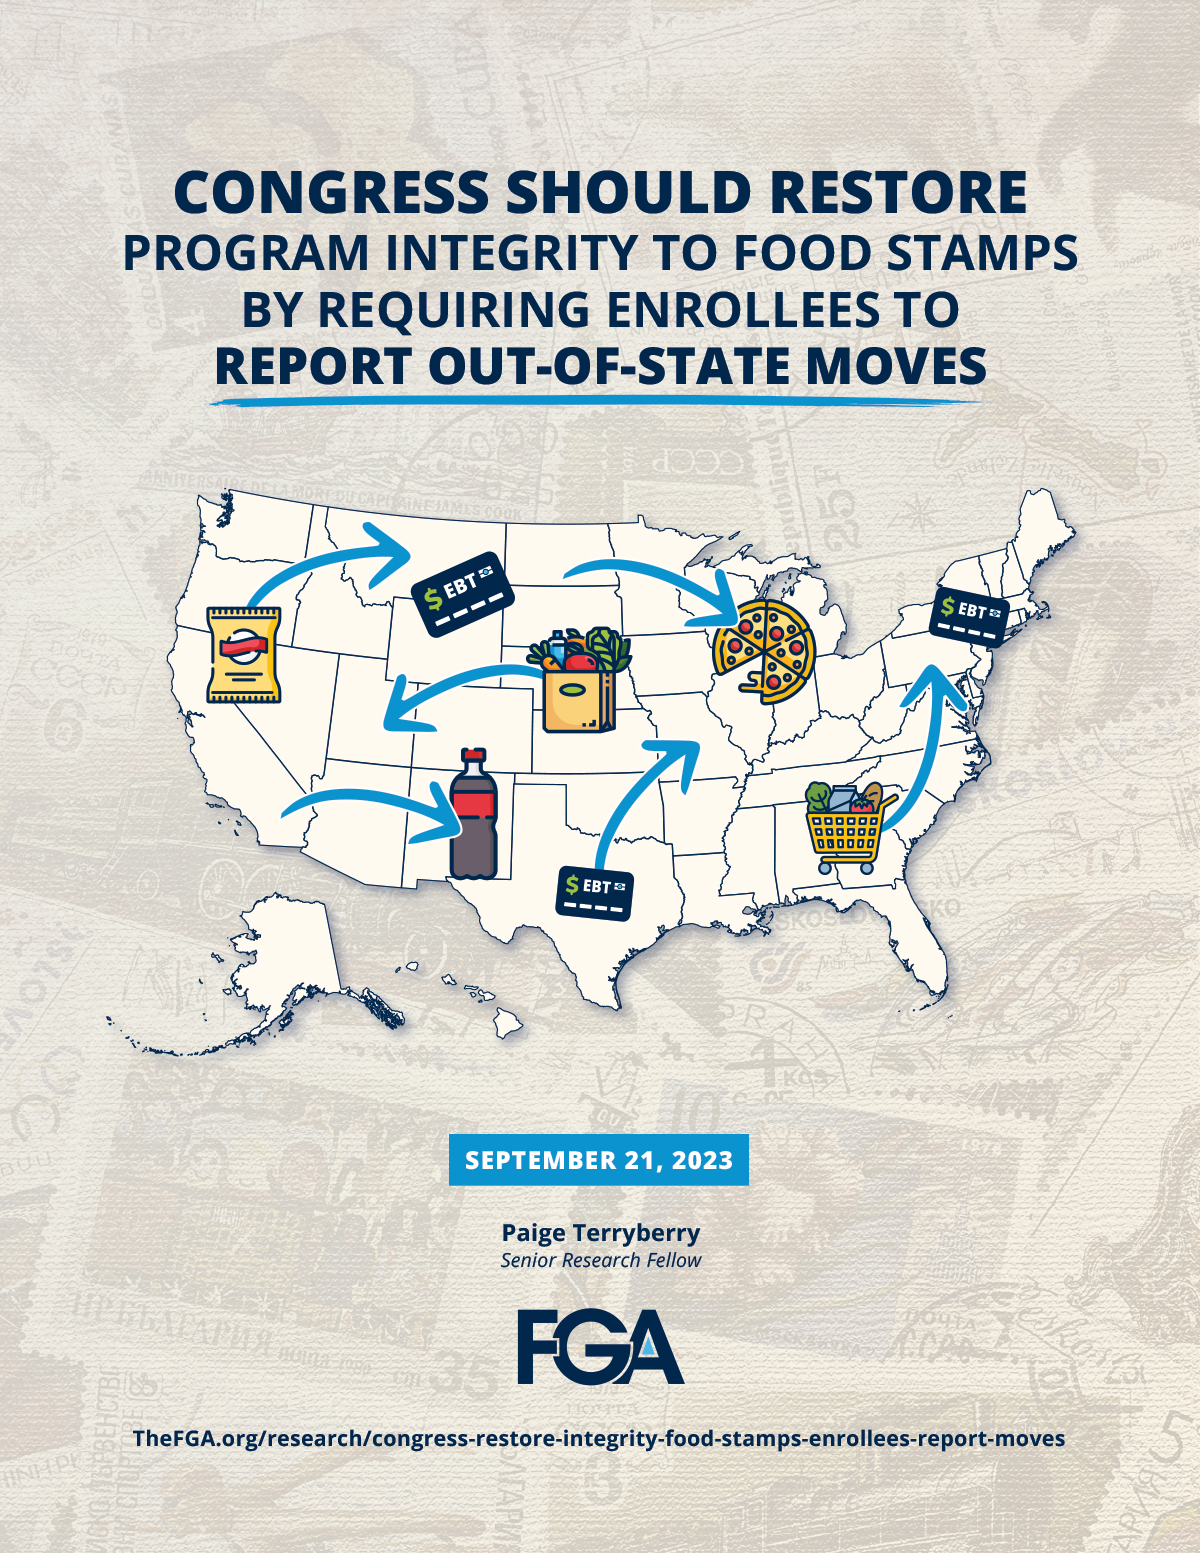 Congress Should Restore Program Integrity To Food Stamps By Requiring Enrollees To Report Out-Of-State Moves